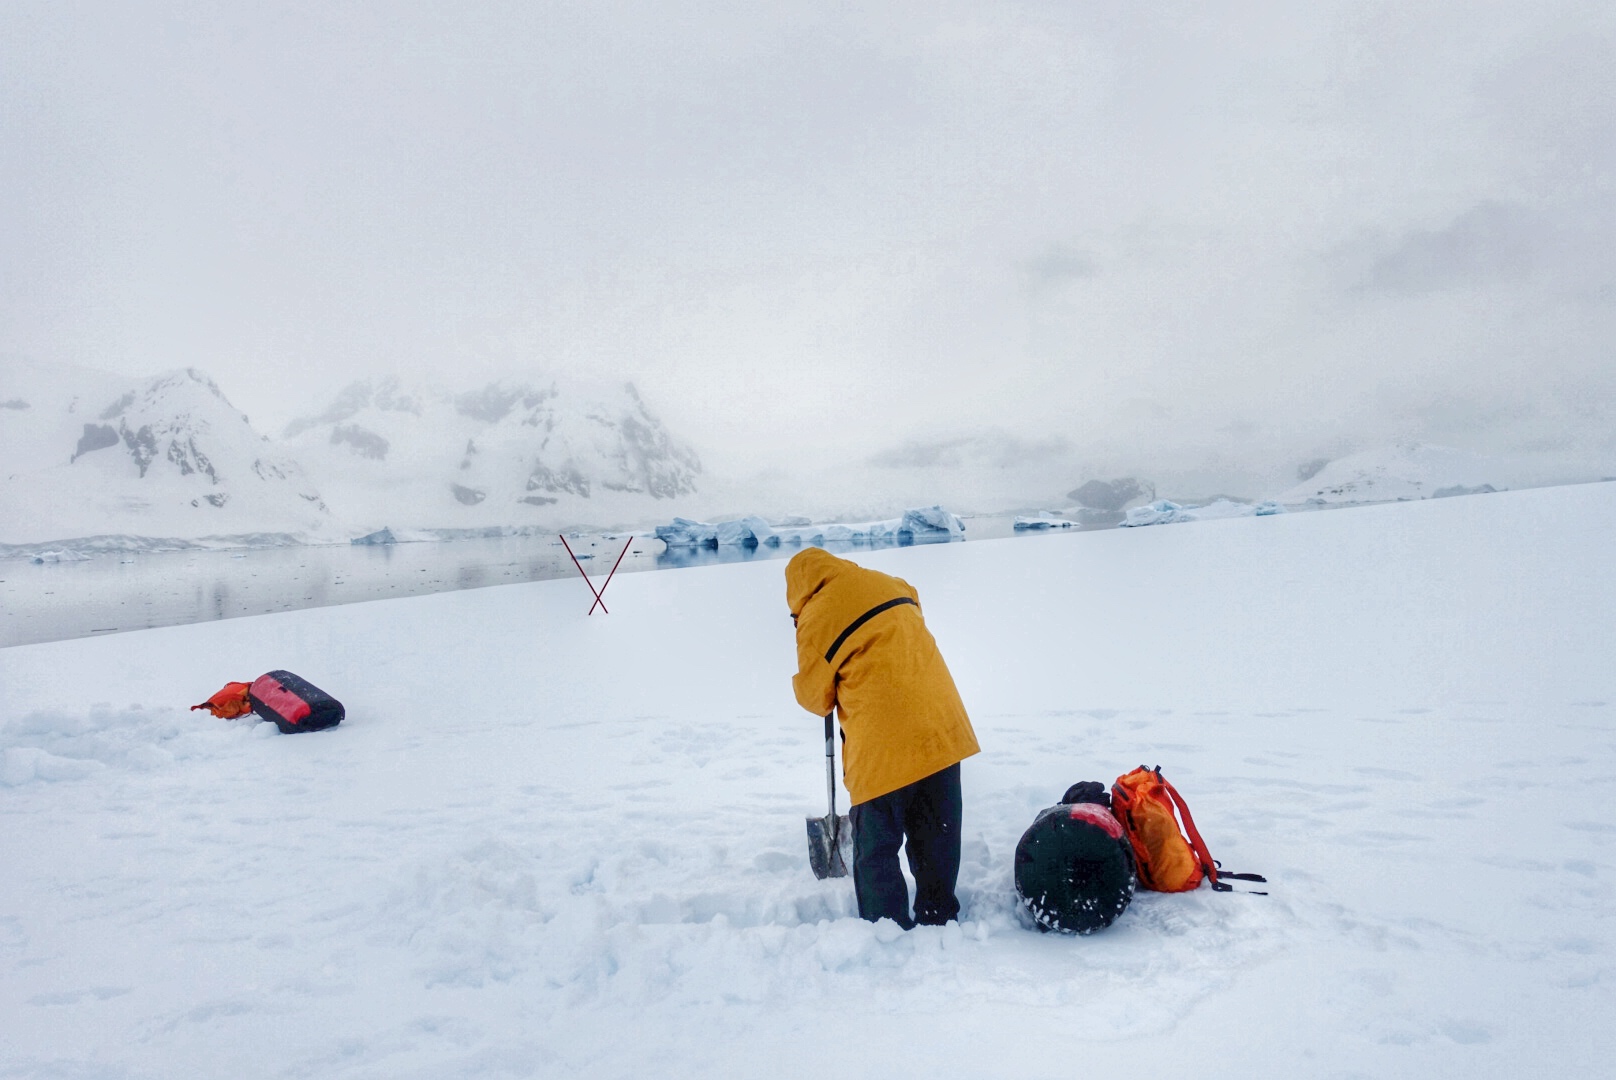  Camping in Antarctica: A person in a yellow jacket using a shove to dig a hole in the snow in Antarctica.